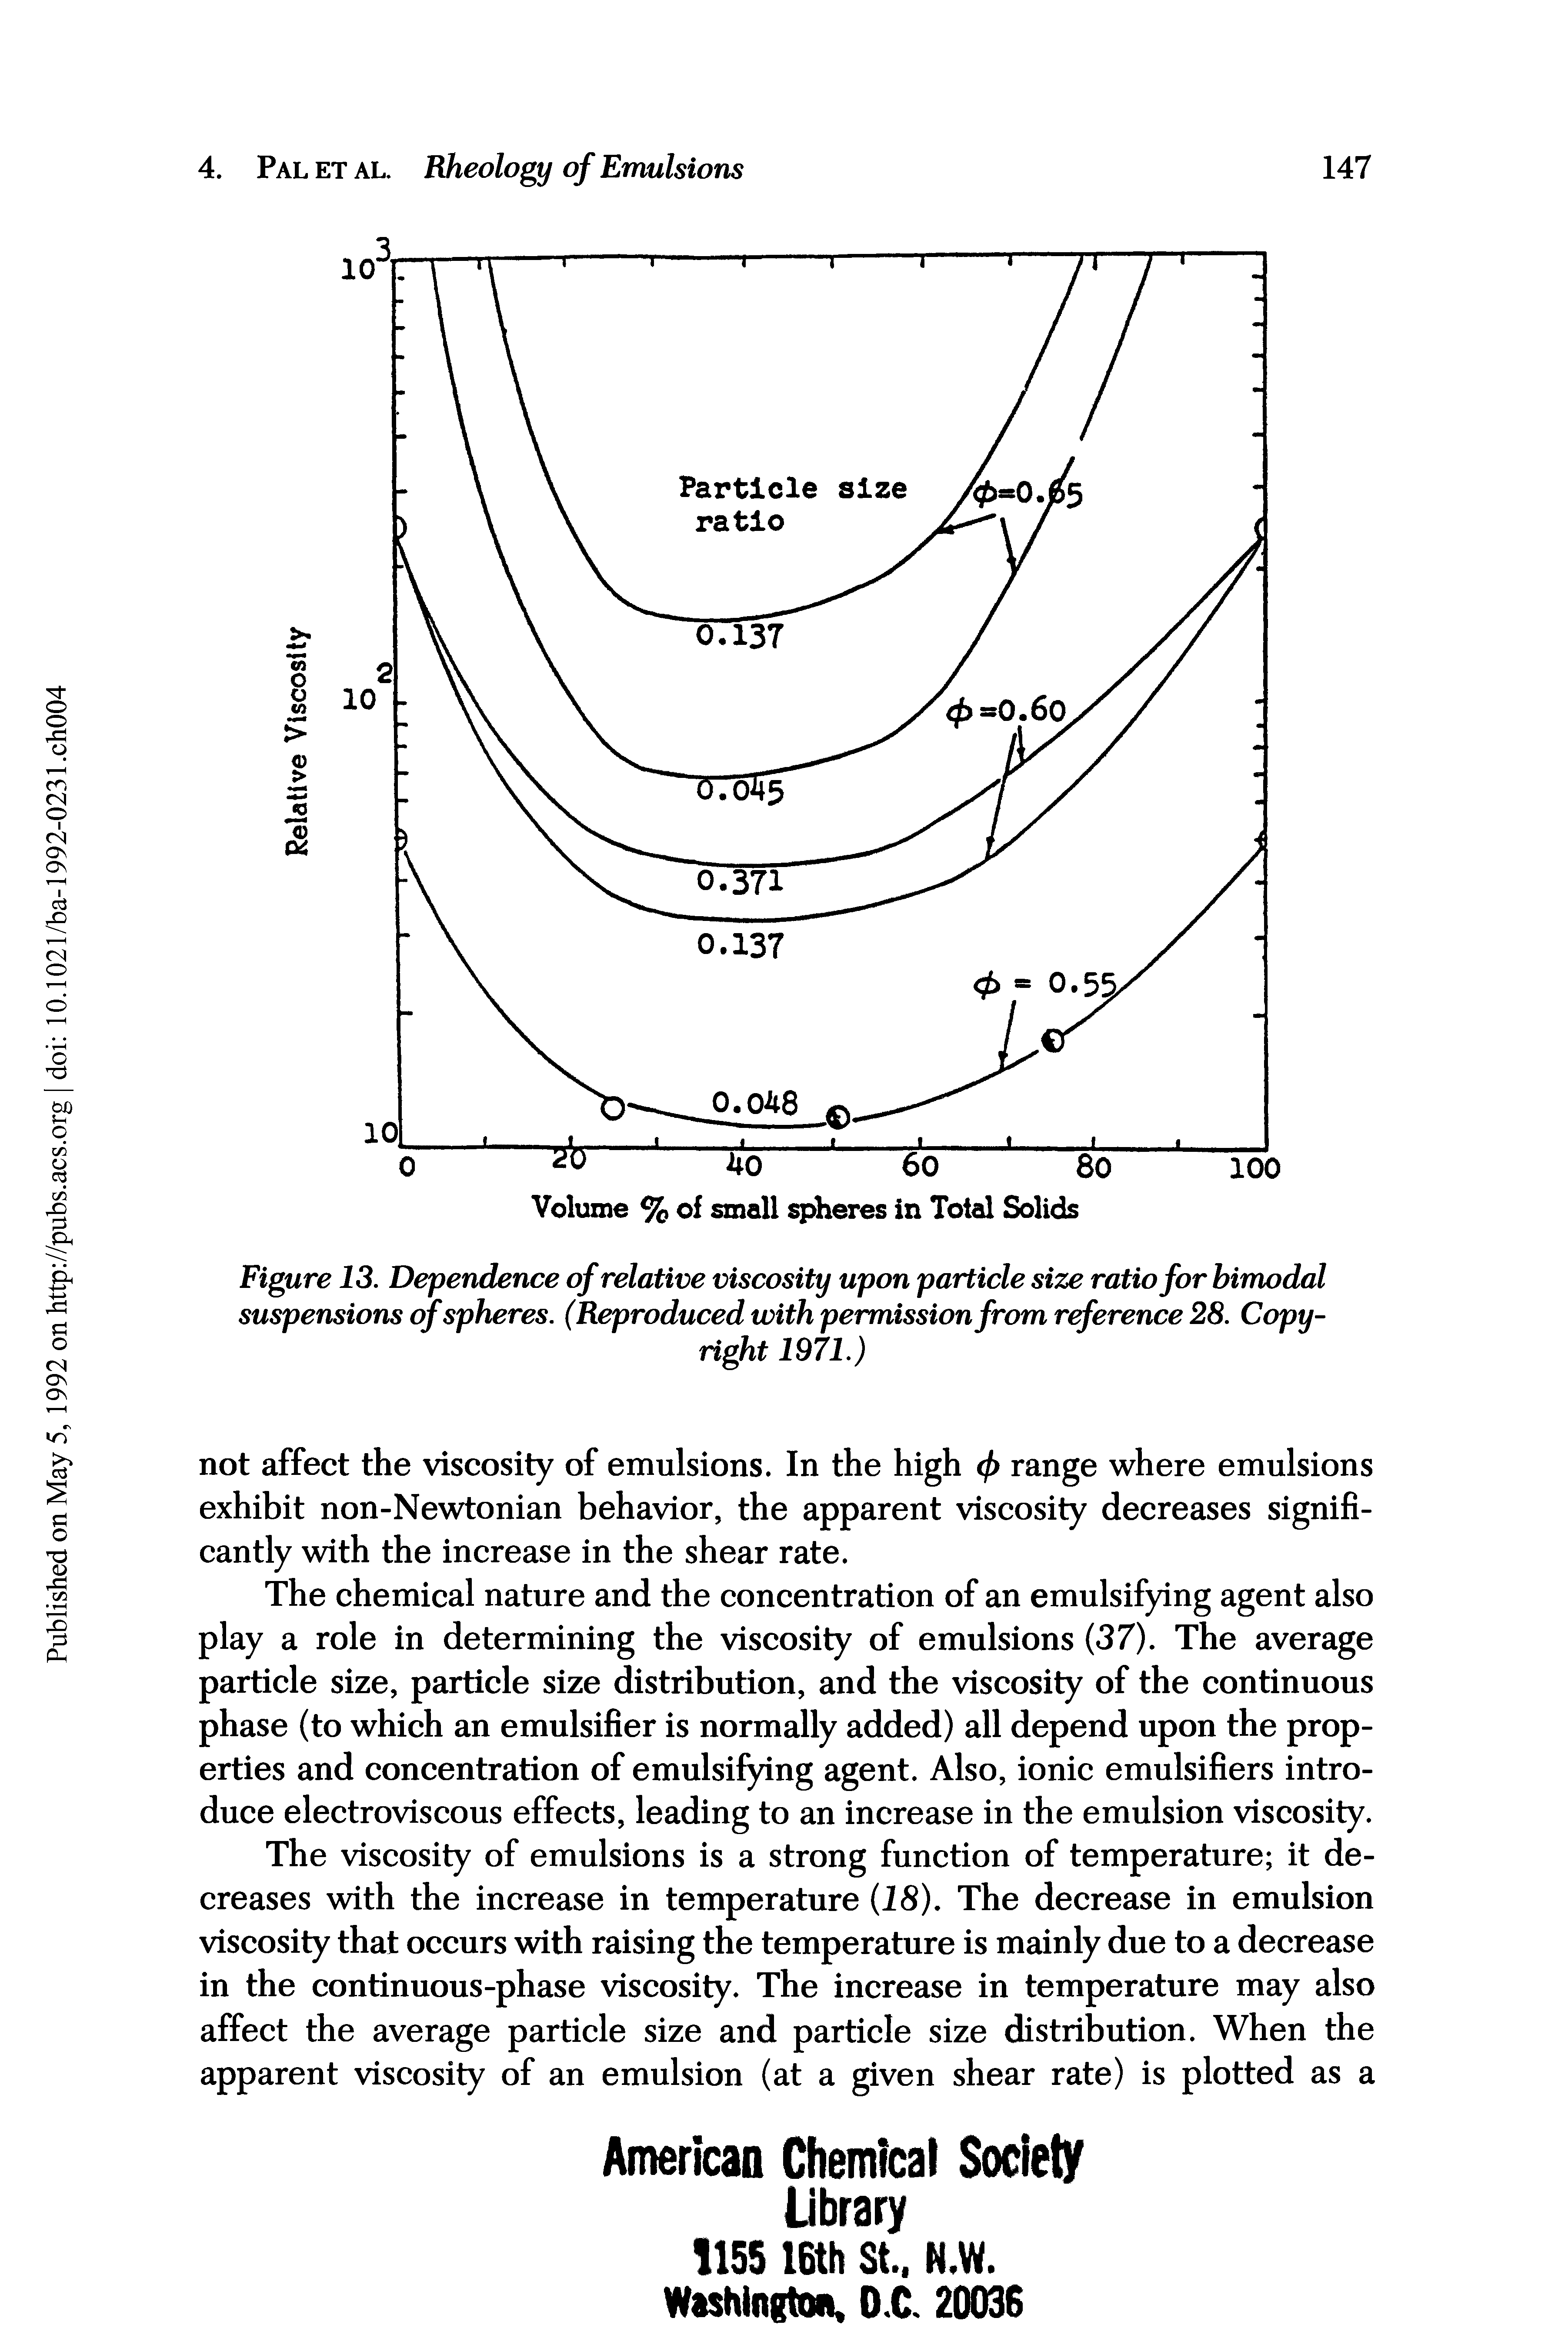 Figure 13. Dependence of relative viscosity upon particle size ratio for himodal suspensions of spheres. (Reproduced with permission from reference 28. Copyright 1971.)...